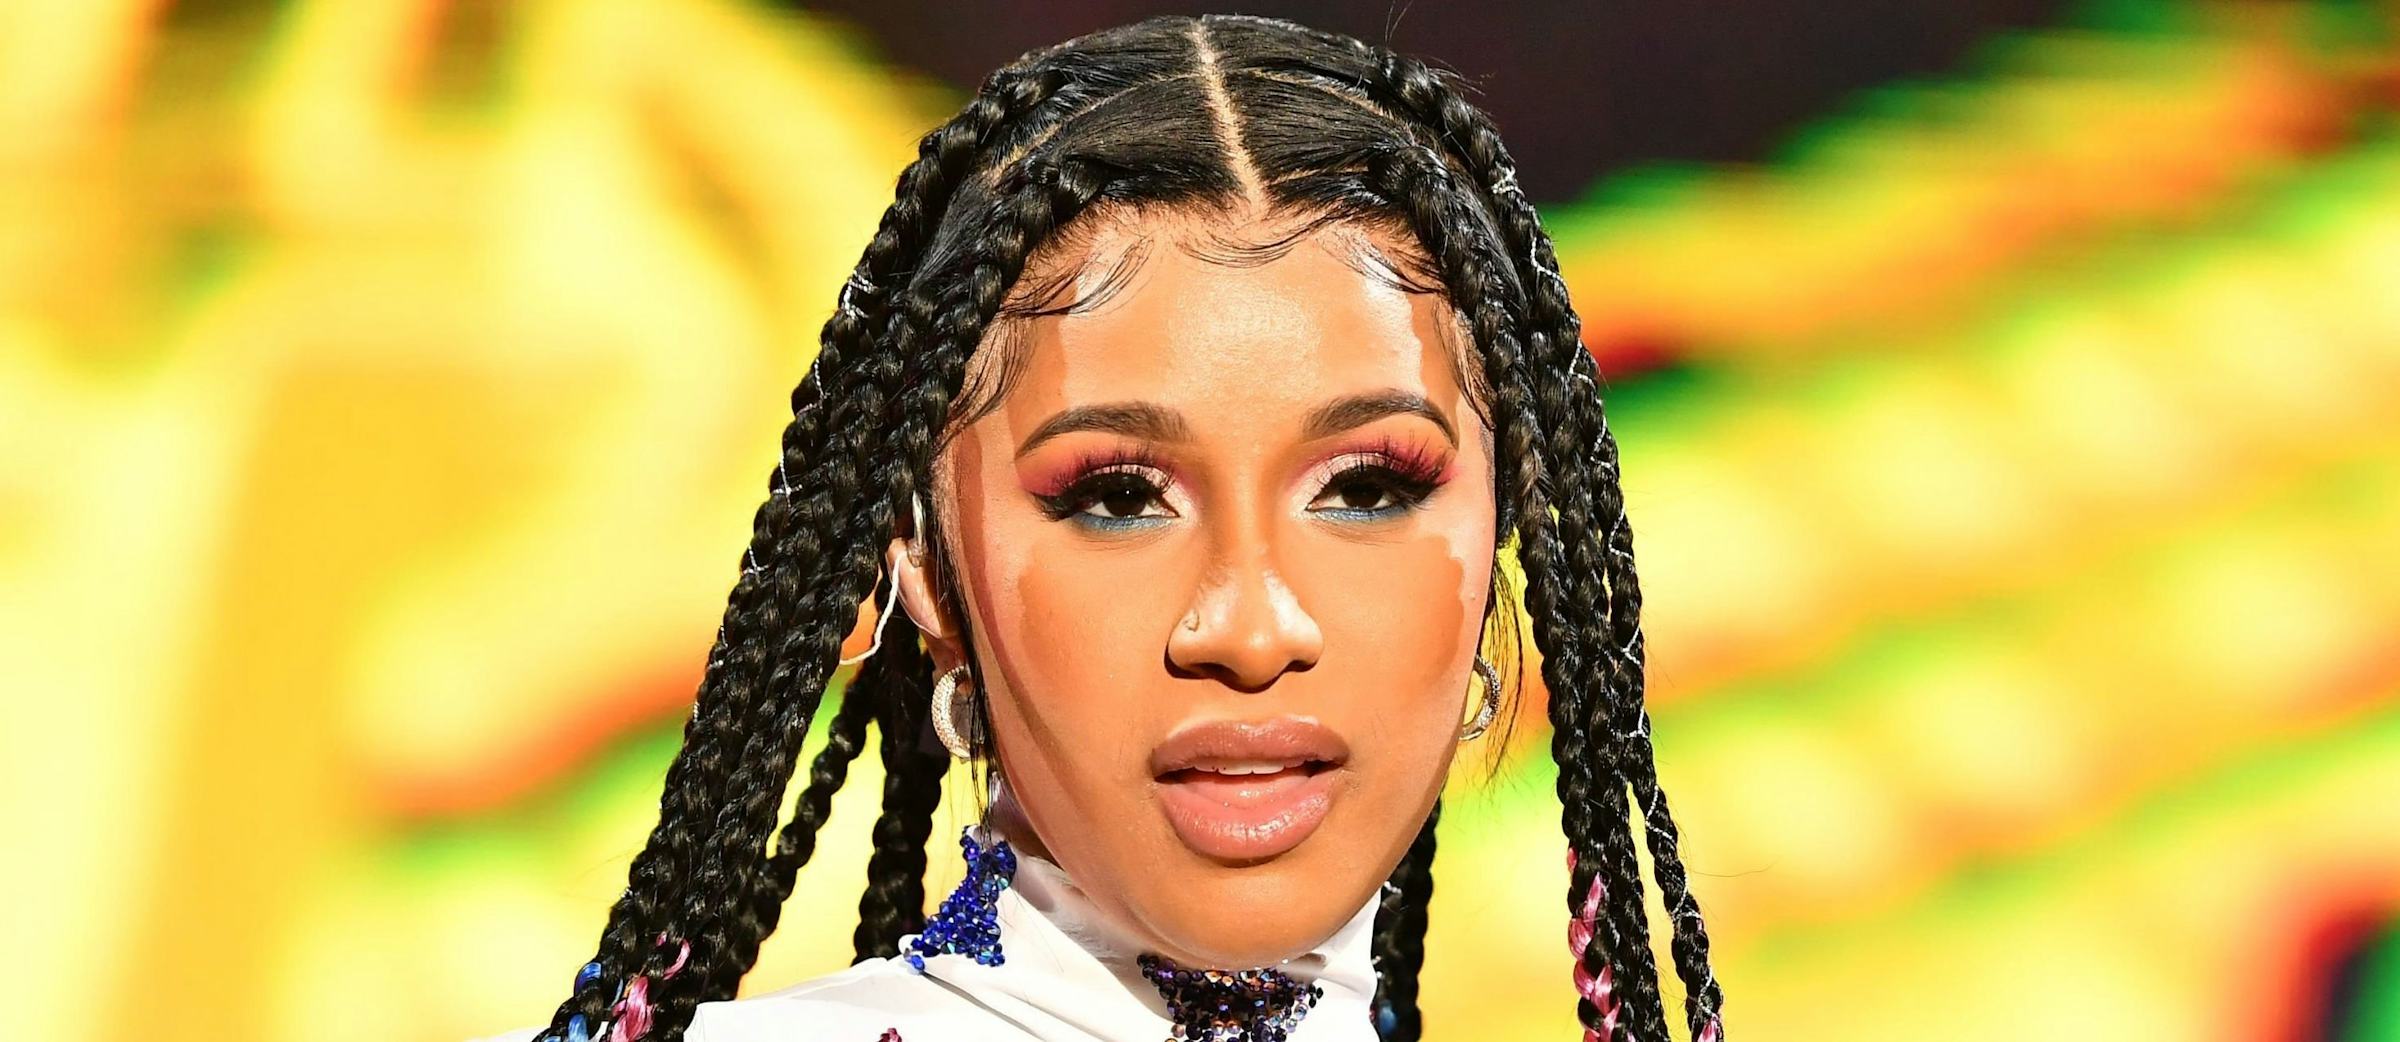 Cardi B's Blue Hair Bow Hairstyles: Inspiration for Your Next Look - wide 9